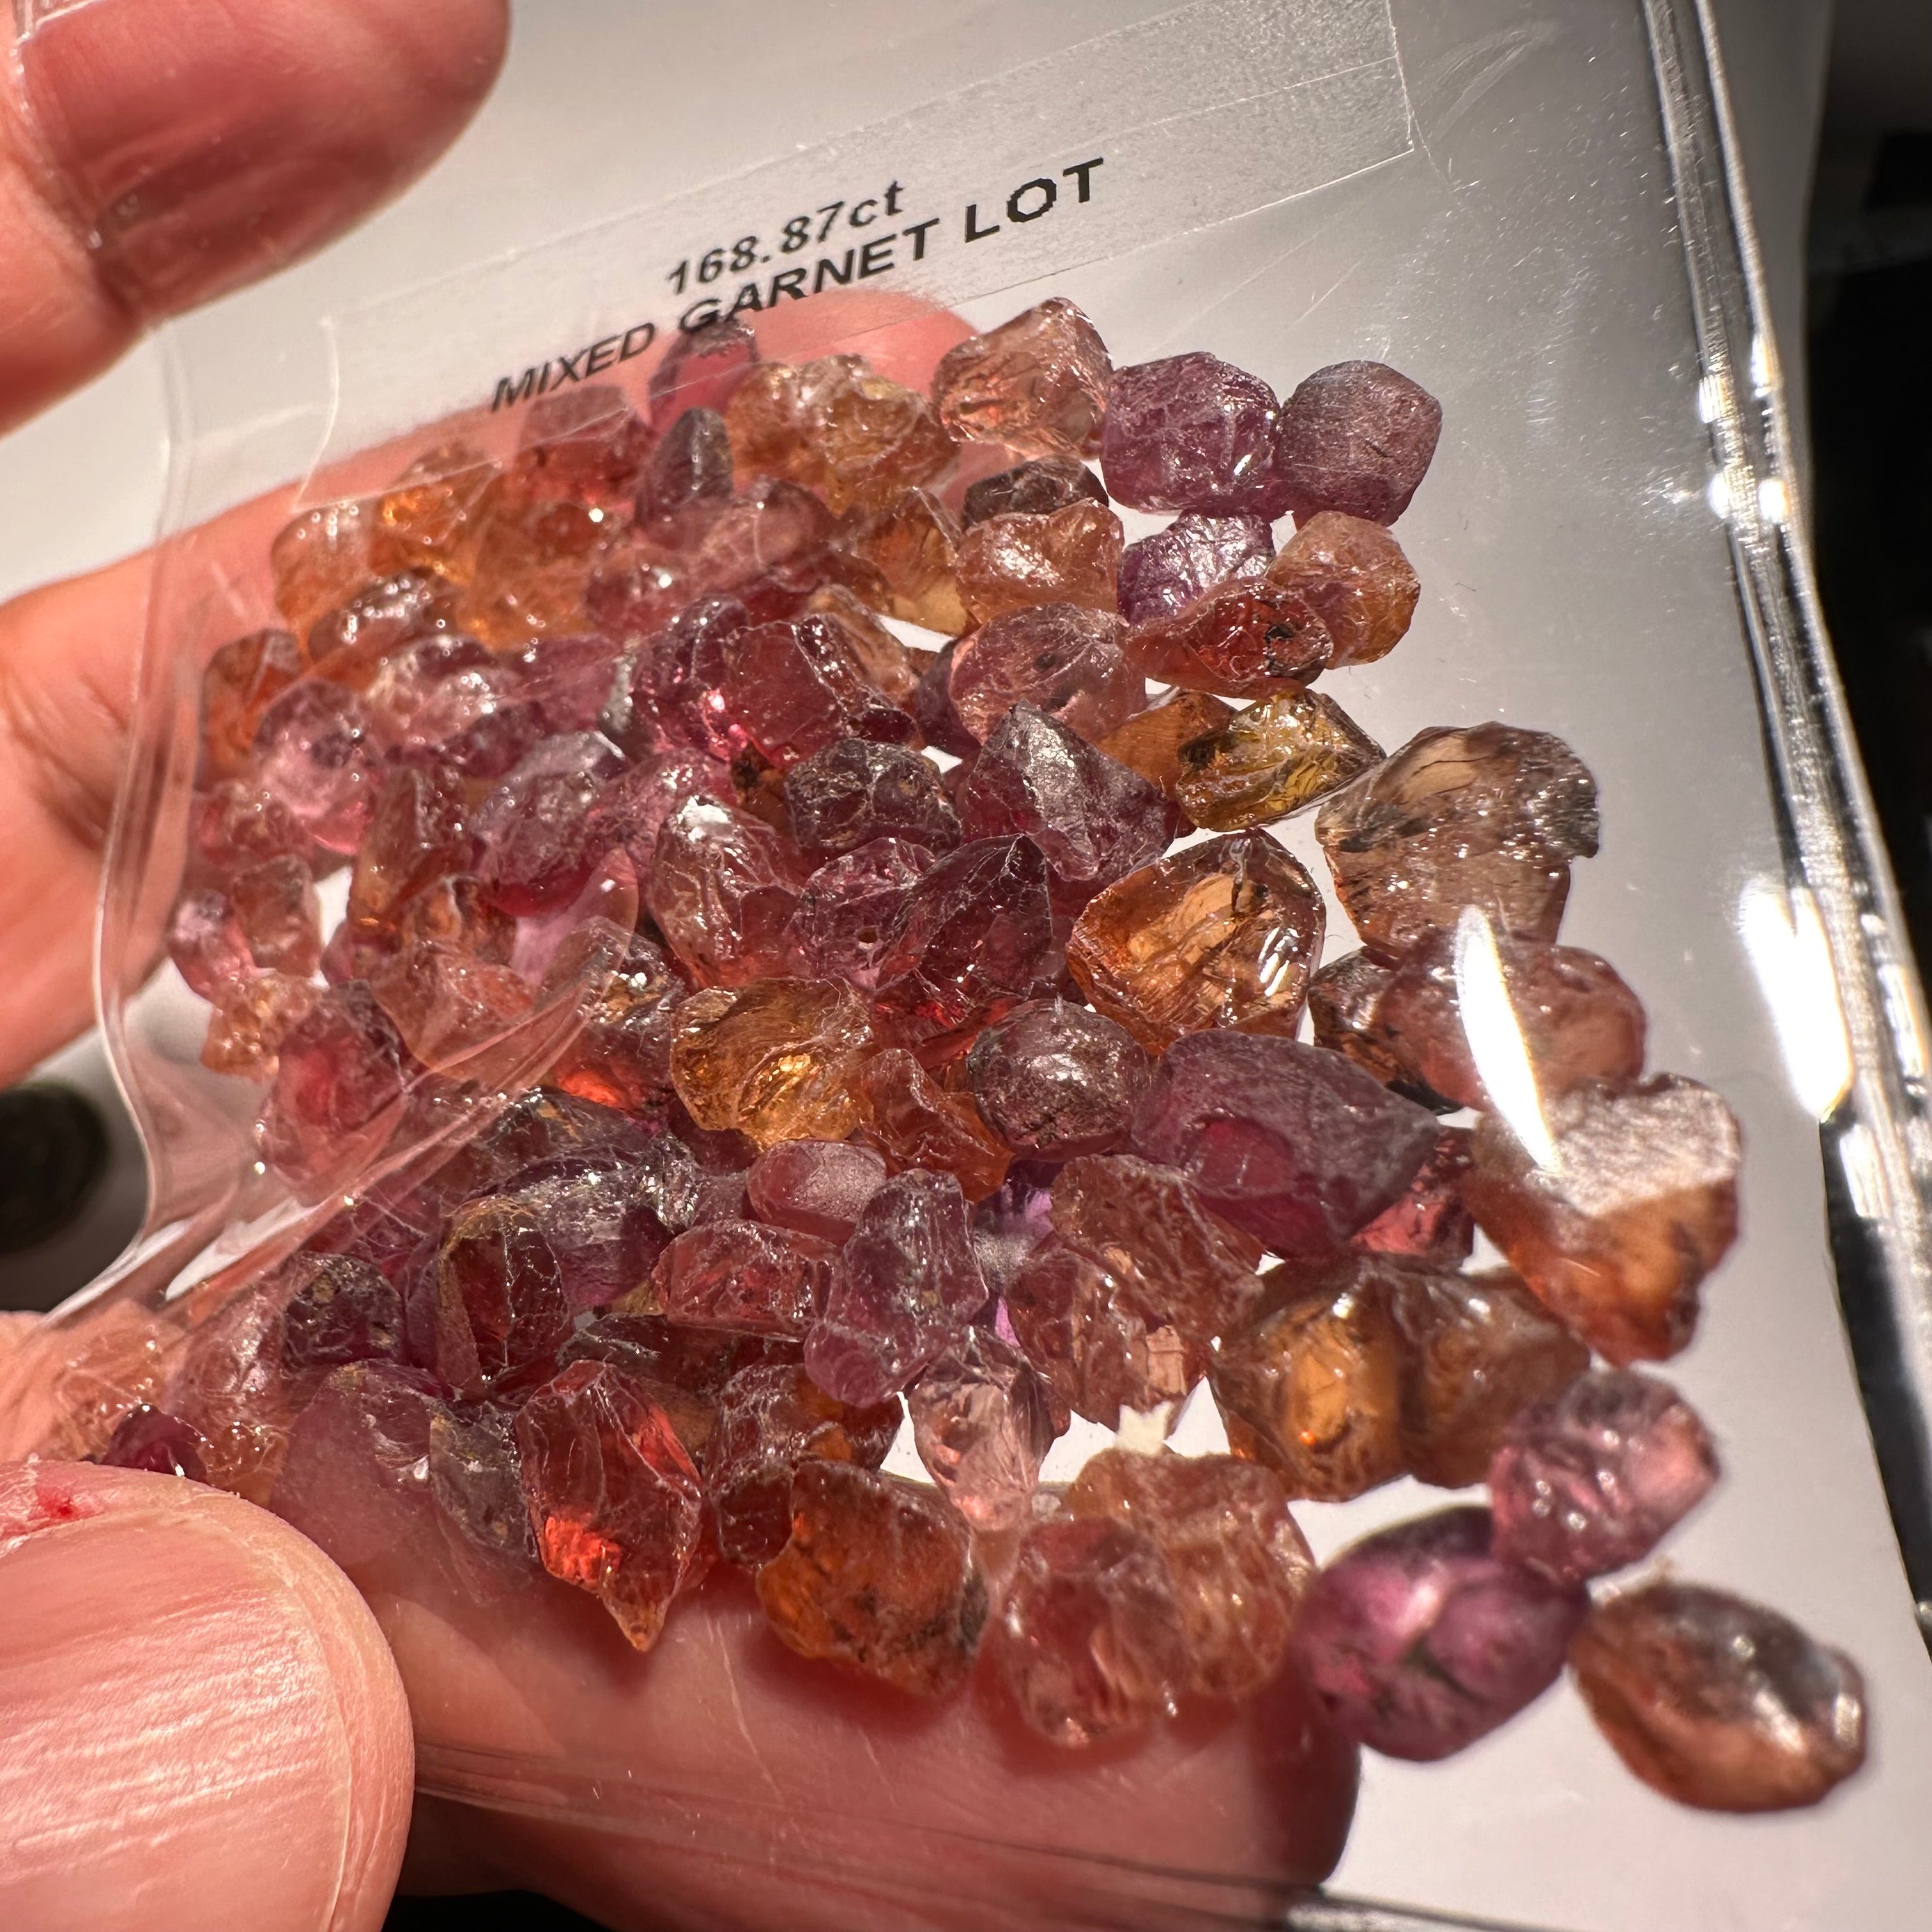 168.87ct Mixed Garnet Lot, Tanzania, Untreated Unheated, slightly included to included